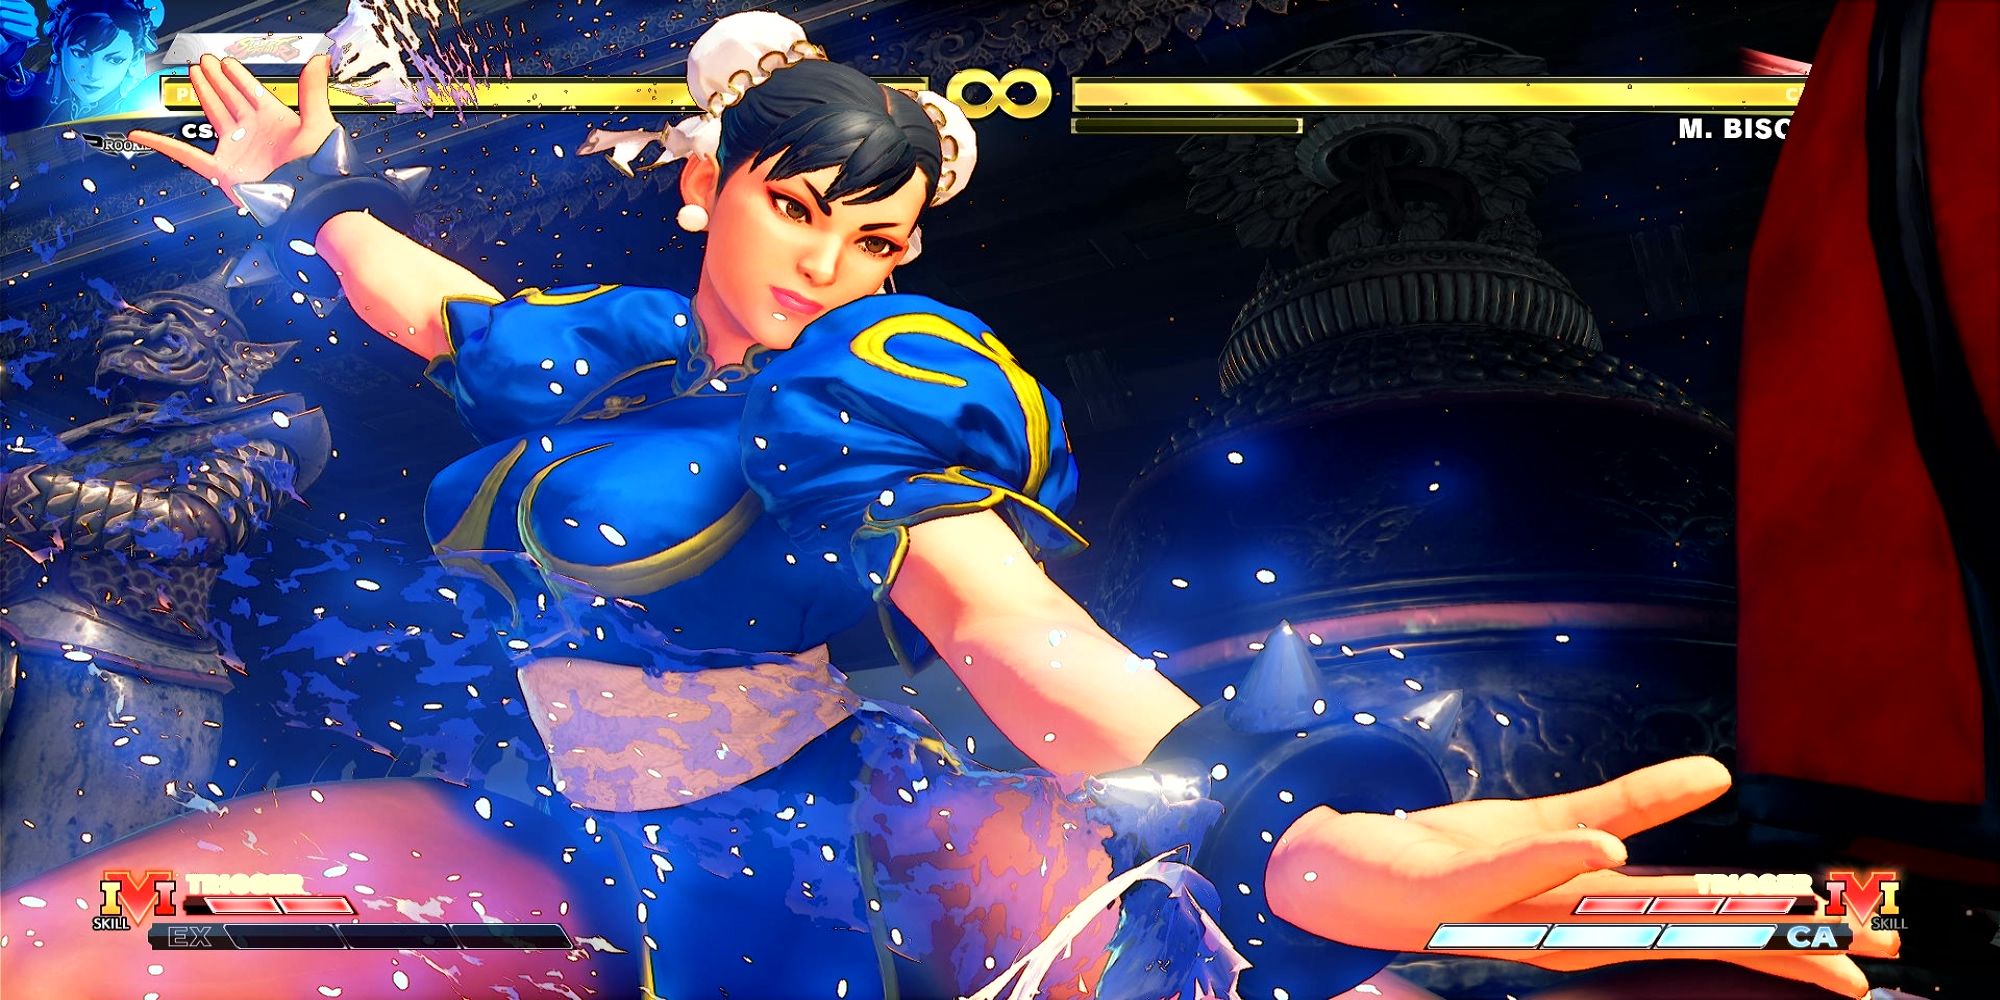 Chun-li prepares her Hoyokusen in a battle against Bison at his Temple Hideout. Street Fighter 5.